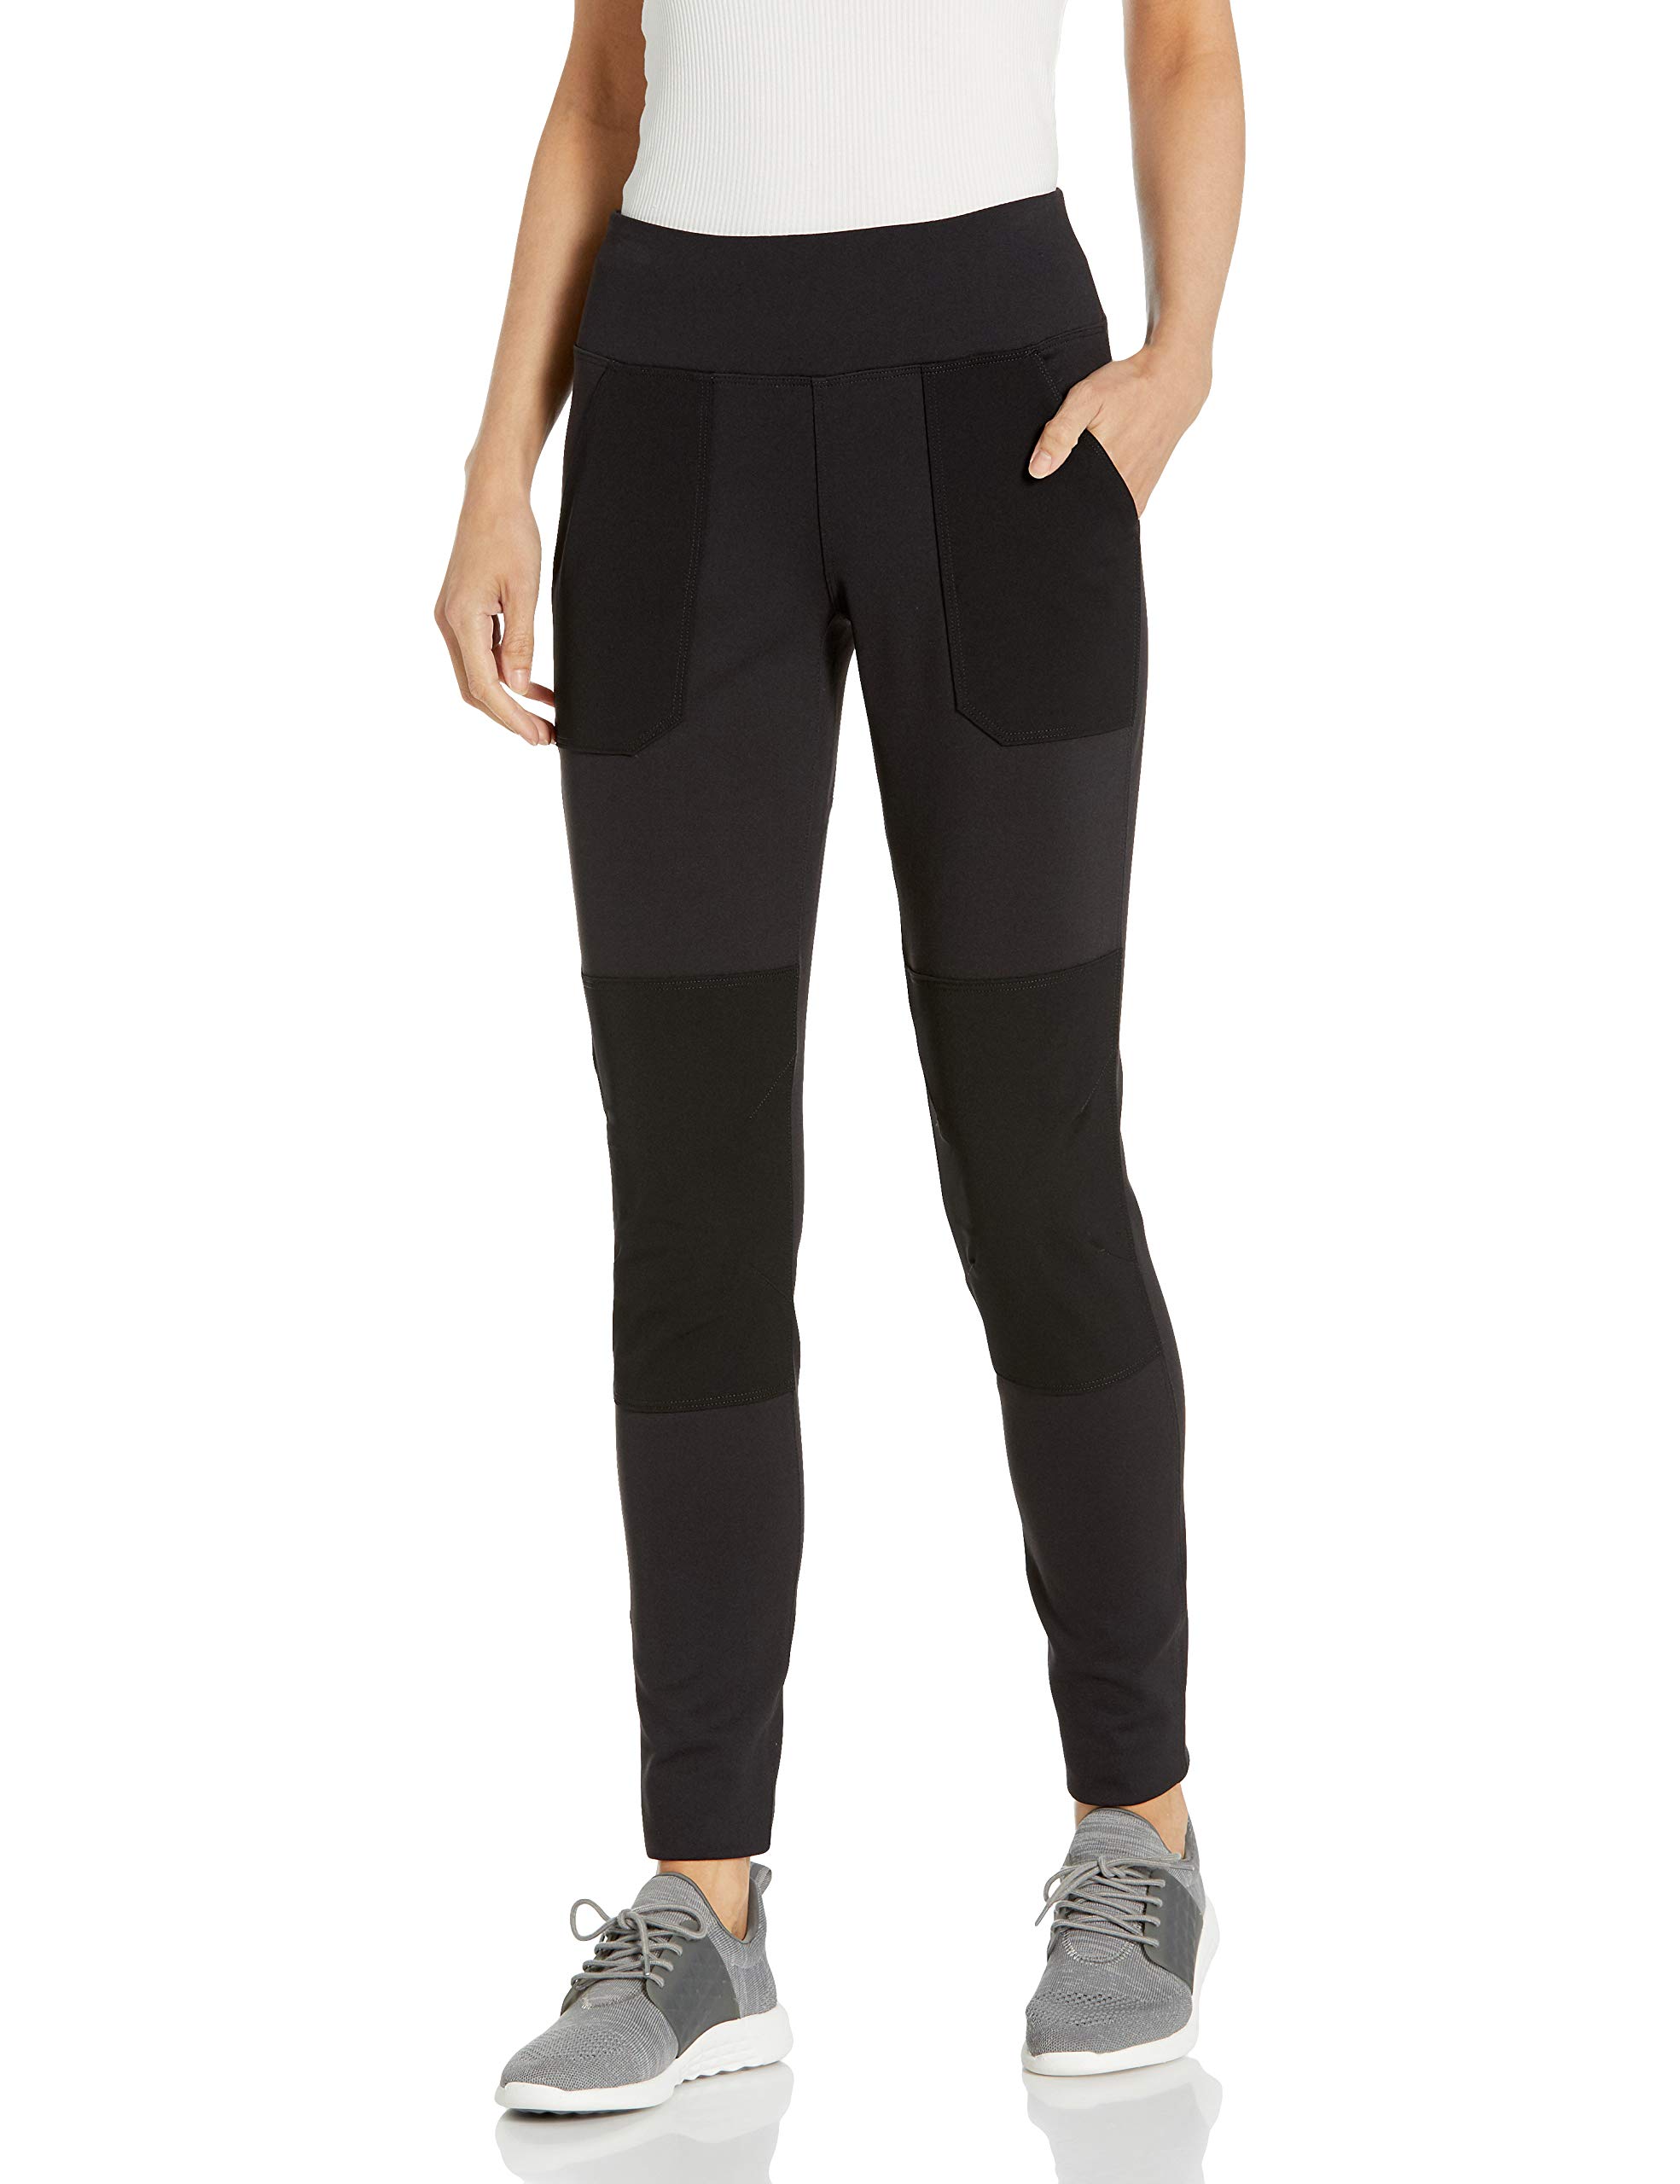 Carhartt Women's Force Fitted Midweight Utility Legging